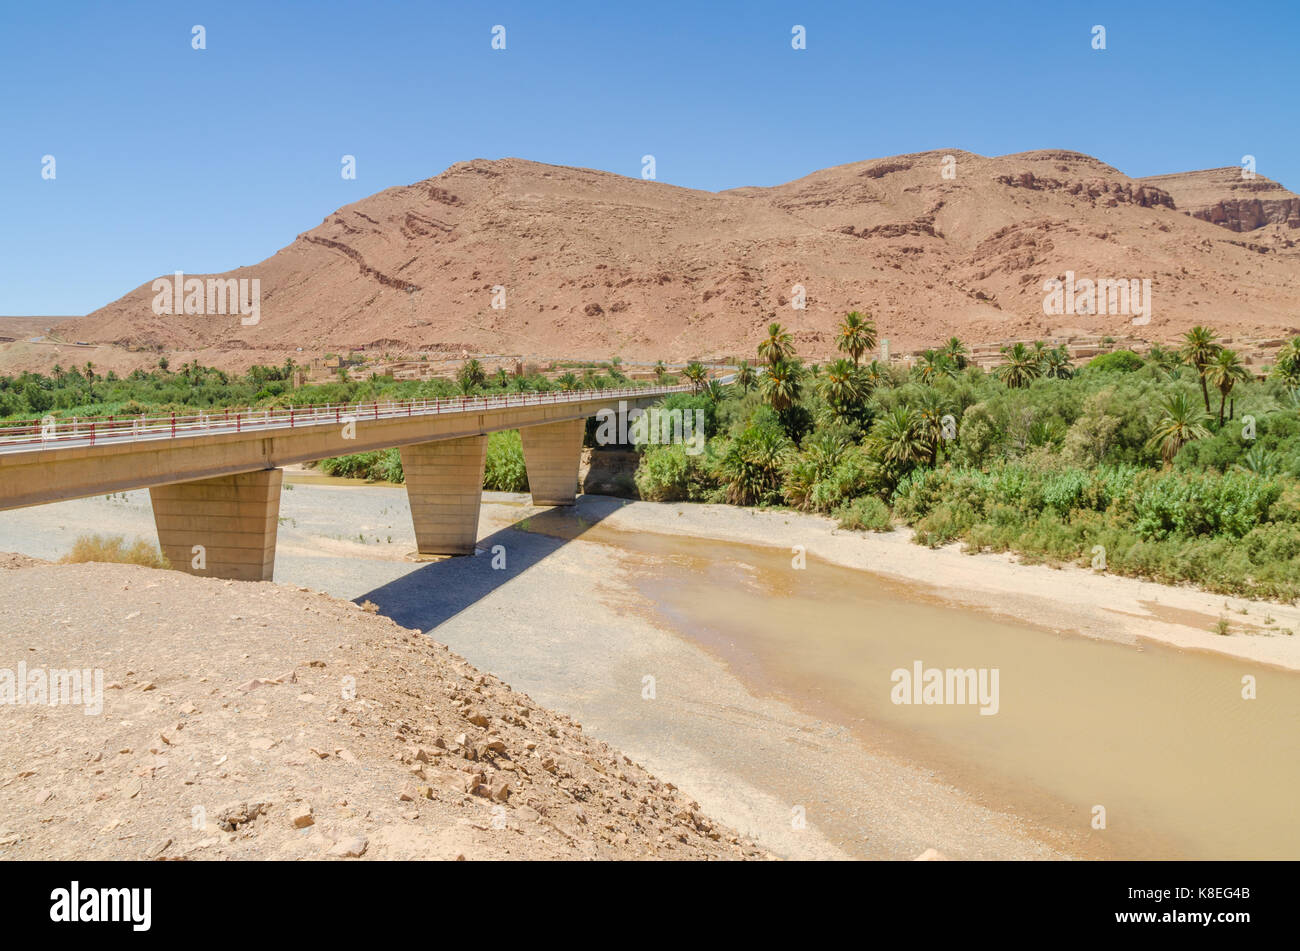 Bridge spanning over dry river bed with some water, mountains and palms in Morocco, North Africa. Stock Photo